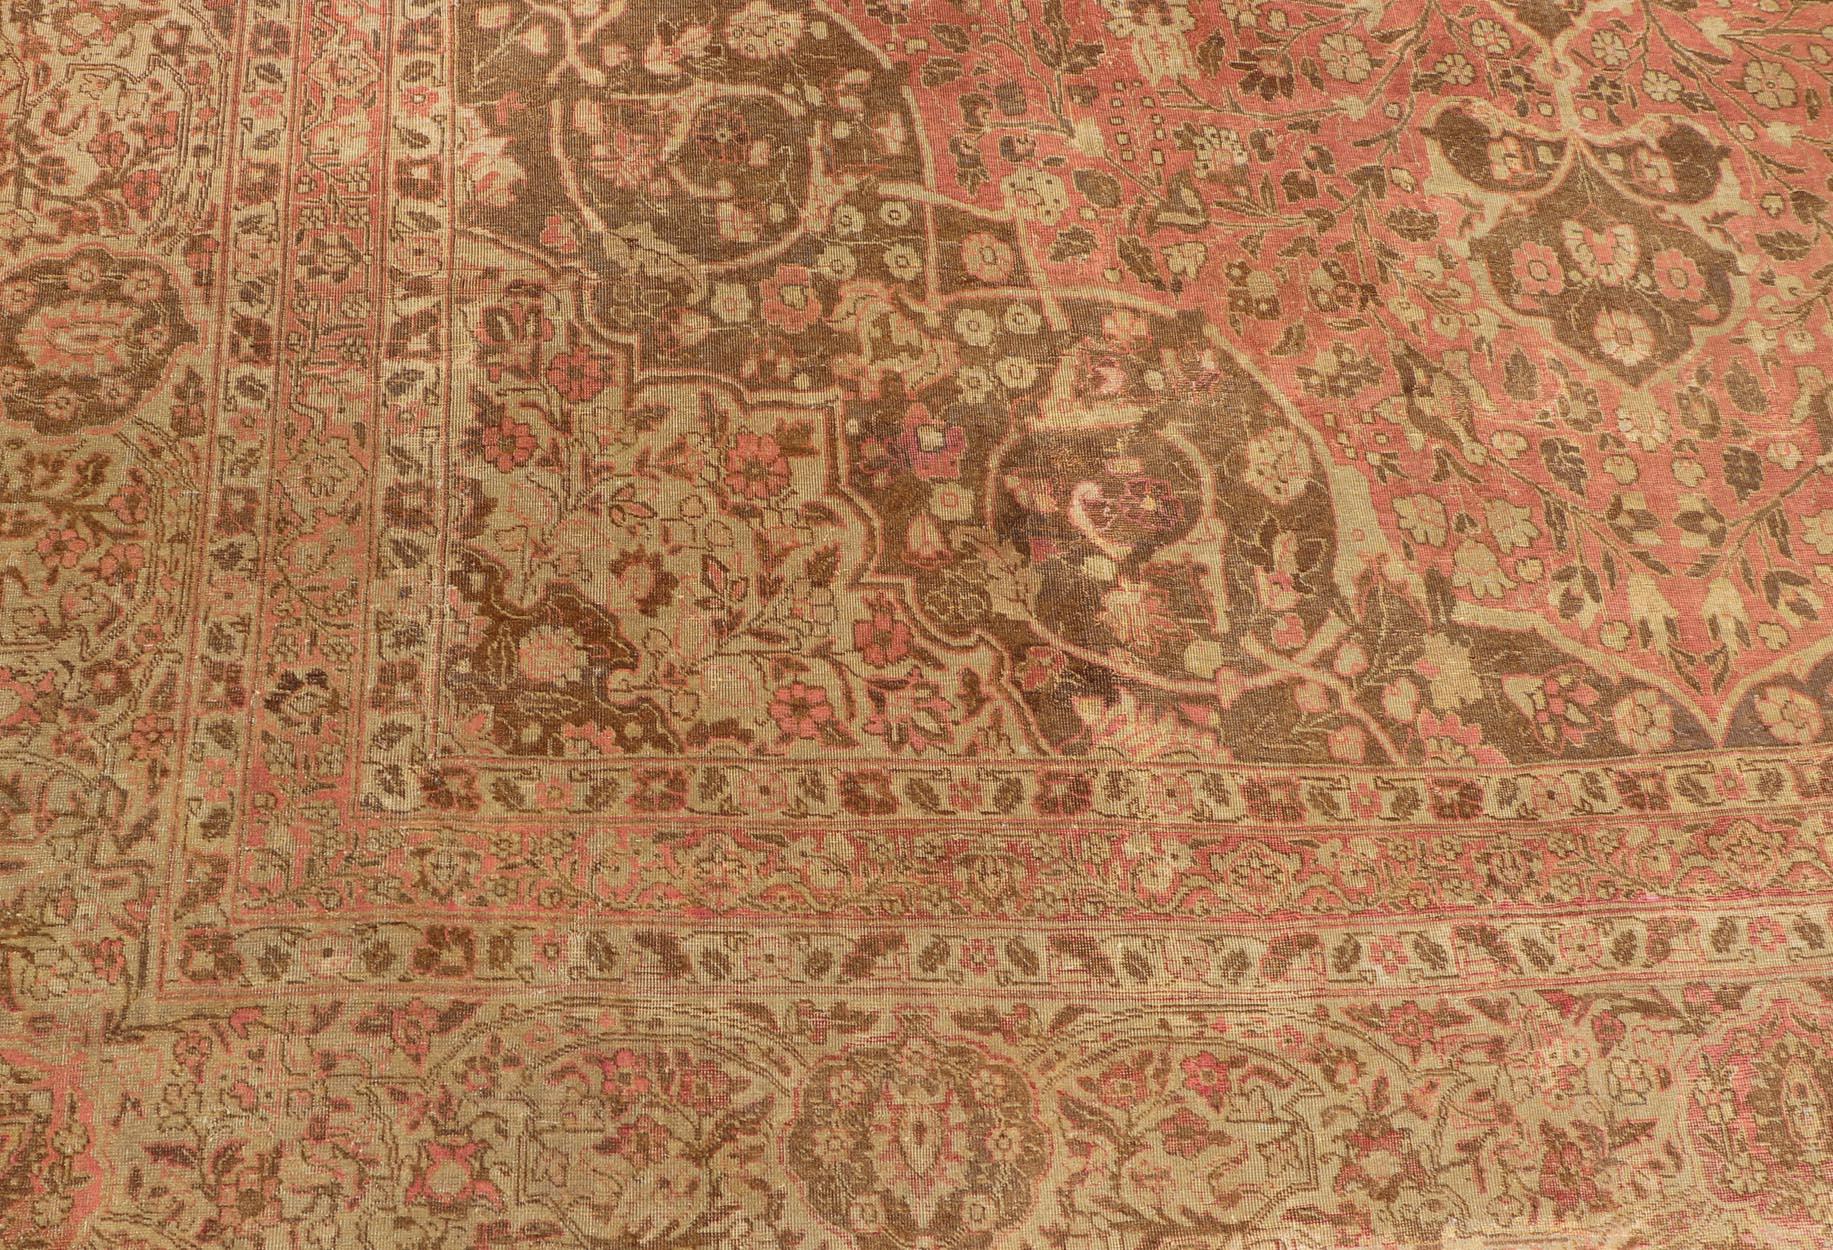 Antique Medallion Tabriz Carpet in Pink, Light Brown, Camel, Taupe, and Salmon In Good Condition For Sale In Atlanta, GA